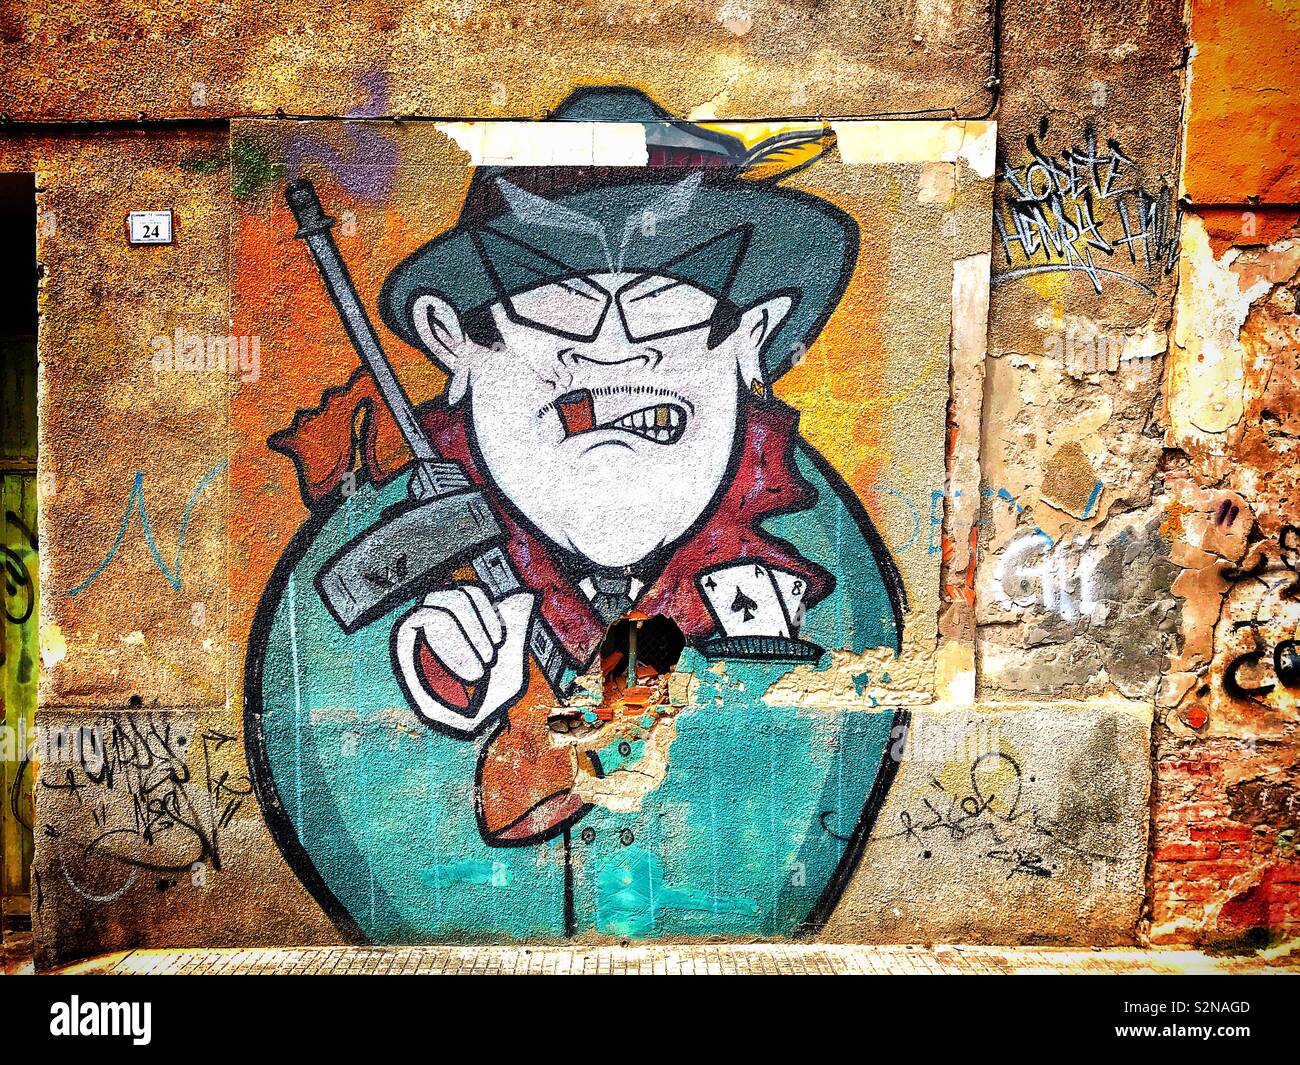 Mural art depicting a cartoon gangster character holding a machine gun, painted on the wall of derelict building in the Spanish fishing village of Santoña Stock Photo